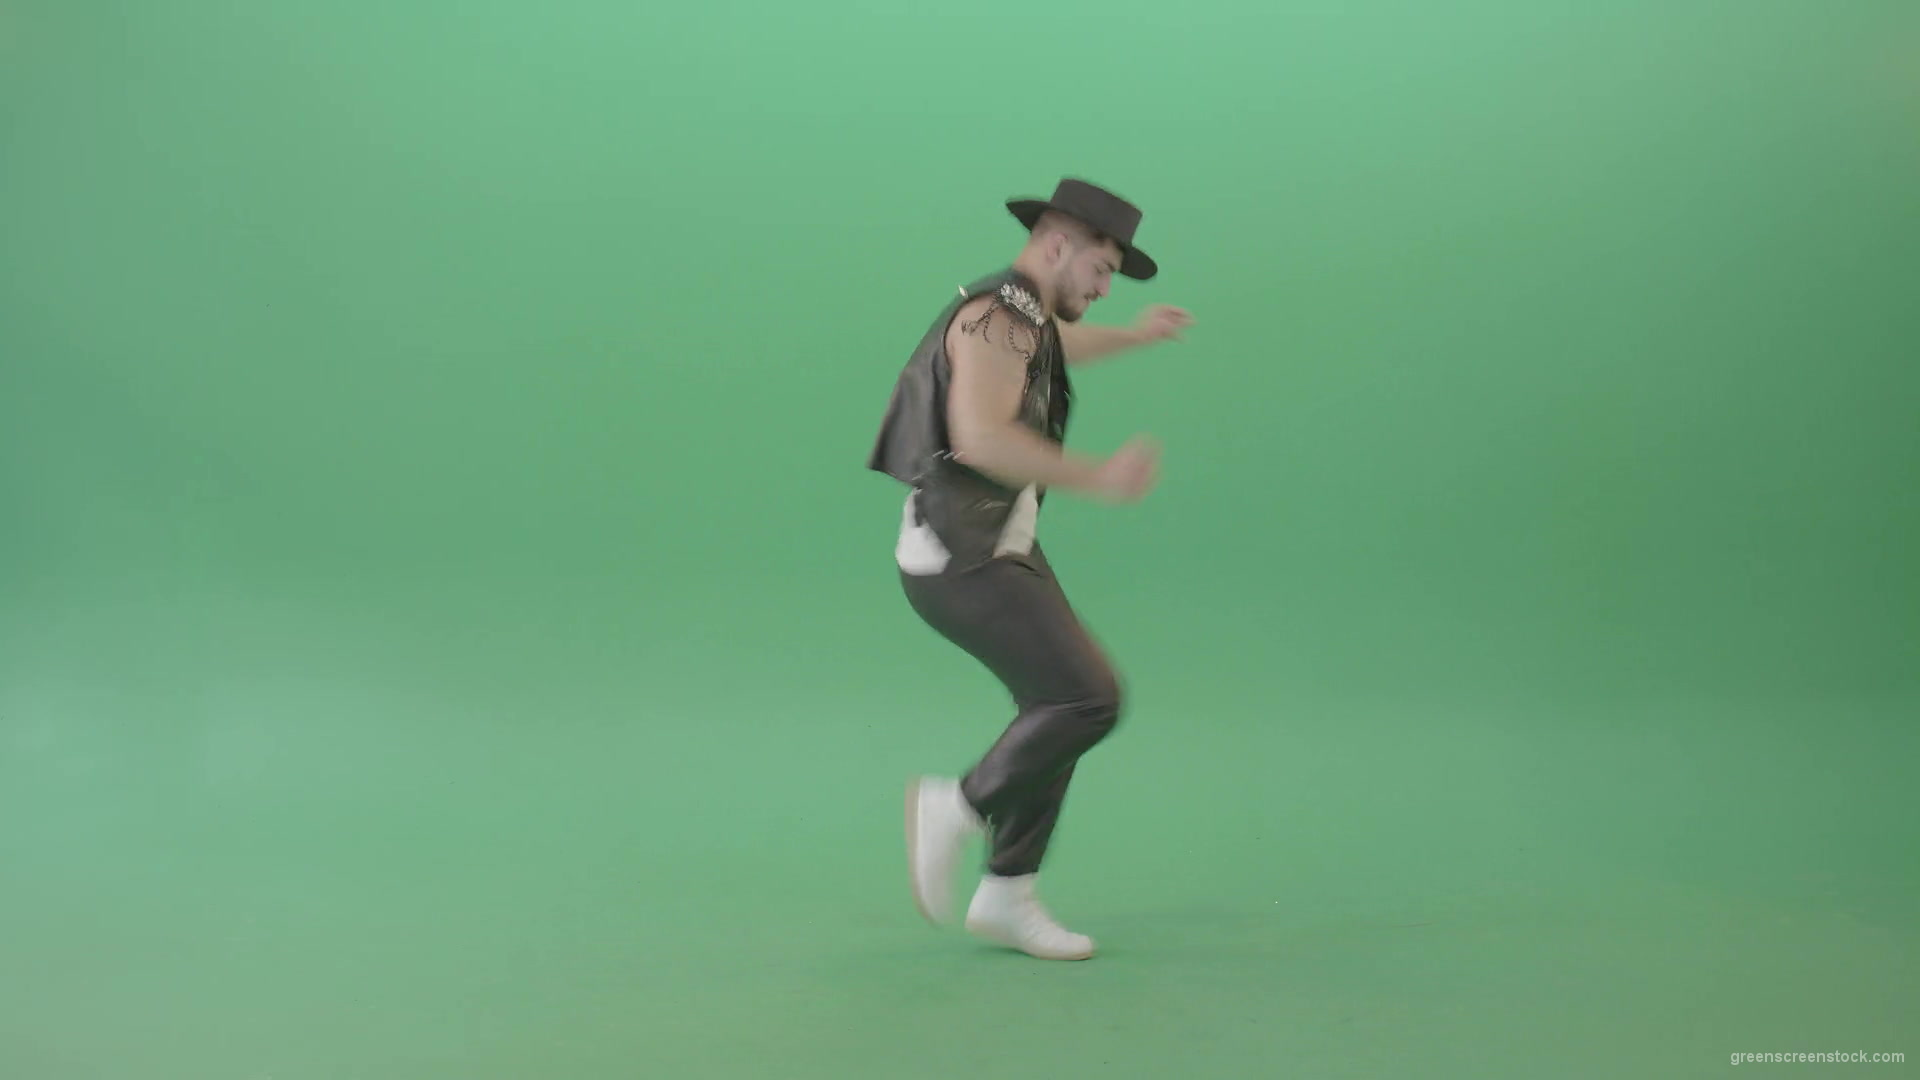 American-Man-with-beard-and-in-black-hat-dancing-Shuffle-isolated-on-Chroma-key-green-screen-4K-Video-Footage-1920_005 Green Screen Stock